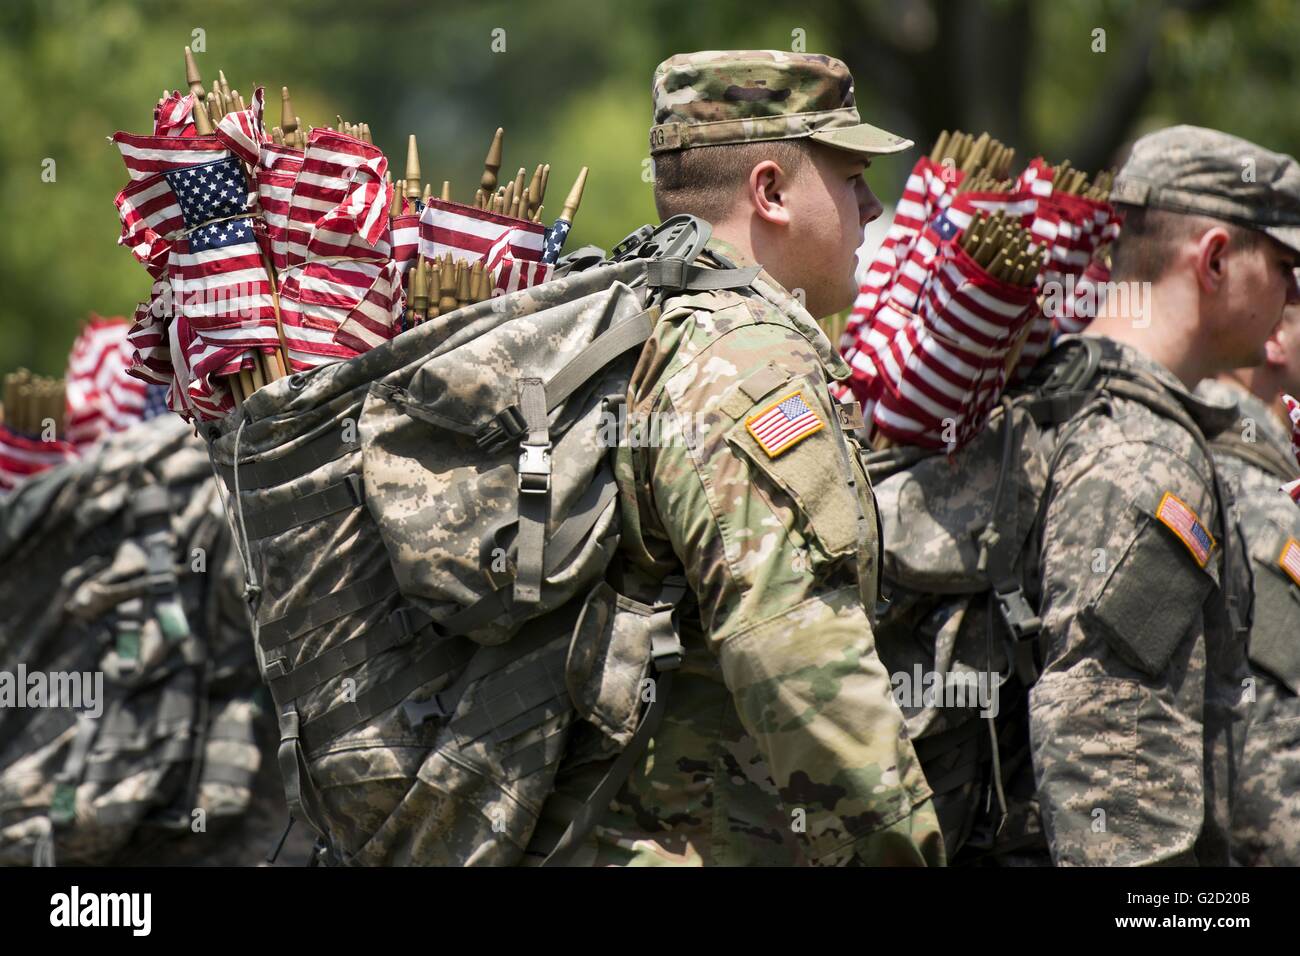 Arlington National Cemetery, Virginia, USA. 27th May, 2016. U.S soldiers with The Old Guard carry hundreds of American flags as they prepare to place them in front of gravesites in Arlington National Cemetery in honor of Memorial Day May 27, 2016 in Arlington, Virginia This tradition, known as 'Flags In,' has been conducted annually since The Old Guard was designated as the Army's official ceremonial unit in 1948. Credit:  Planetpix/Alamy Live News Stock Photo